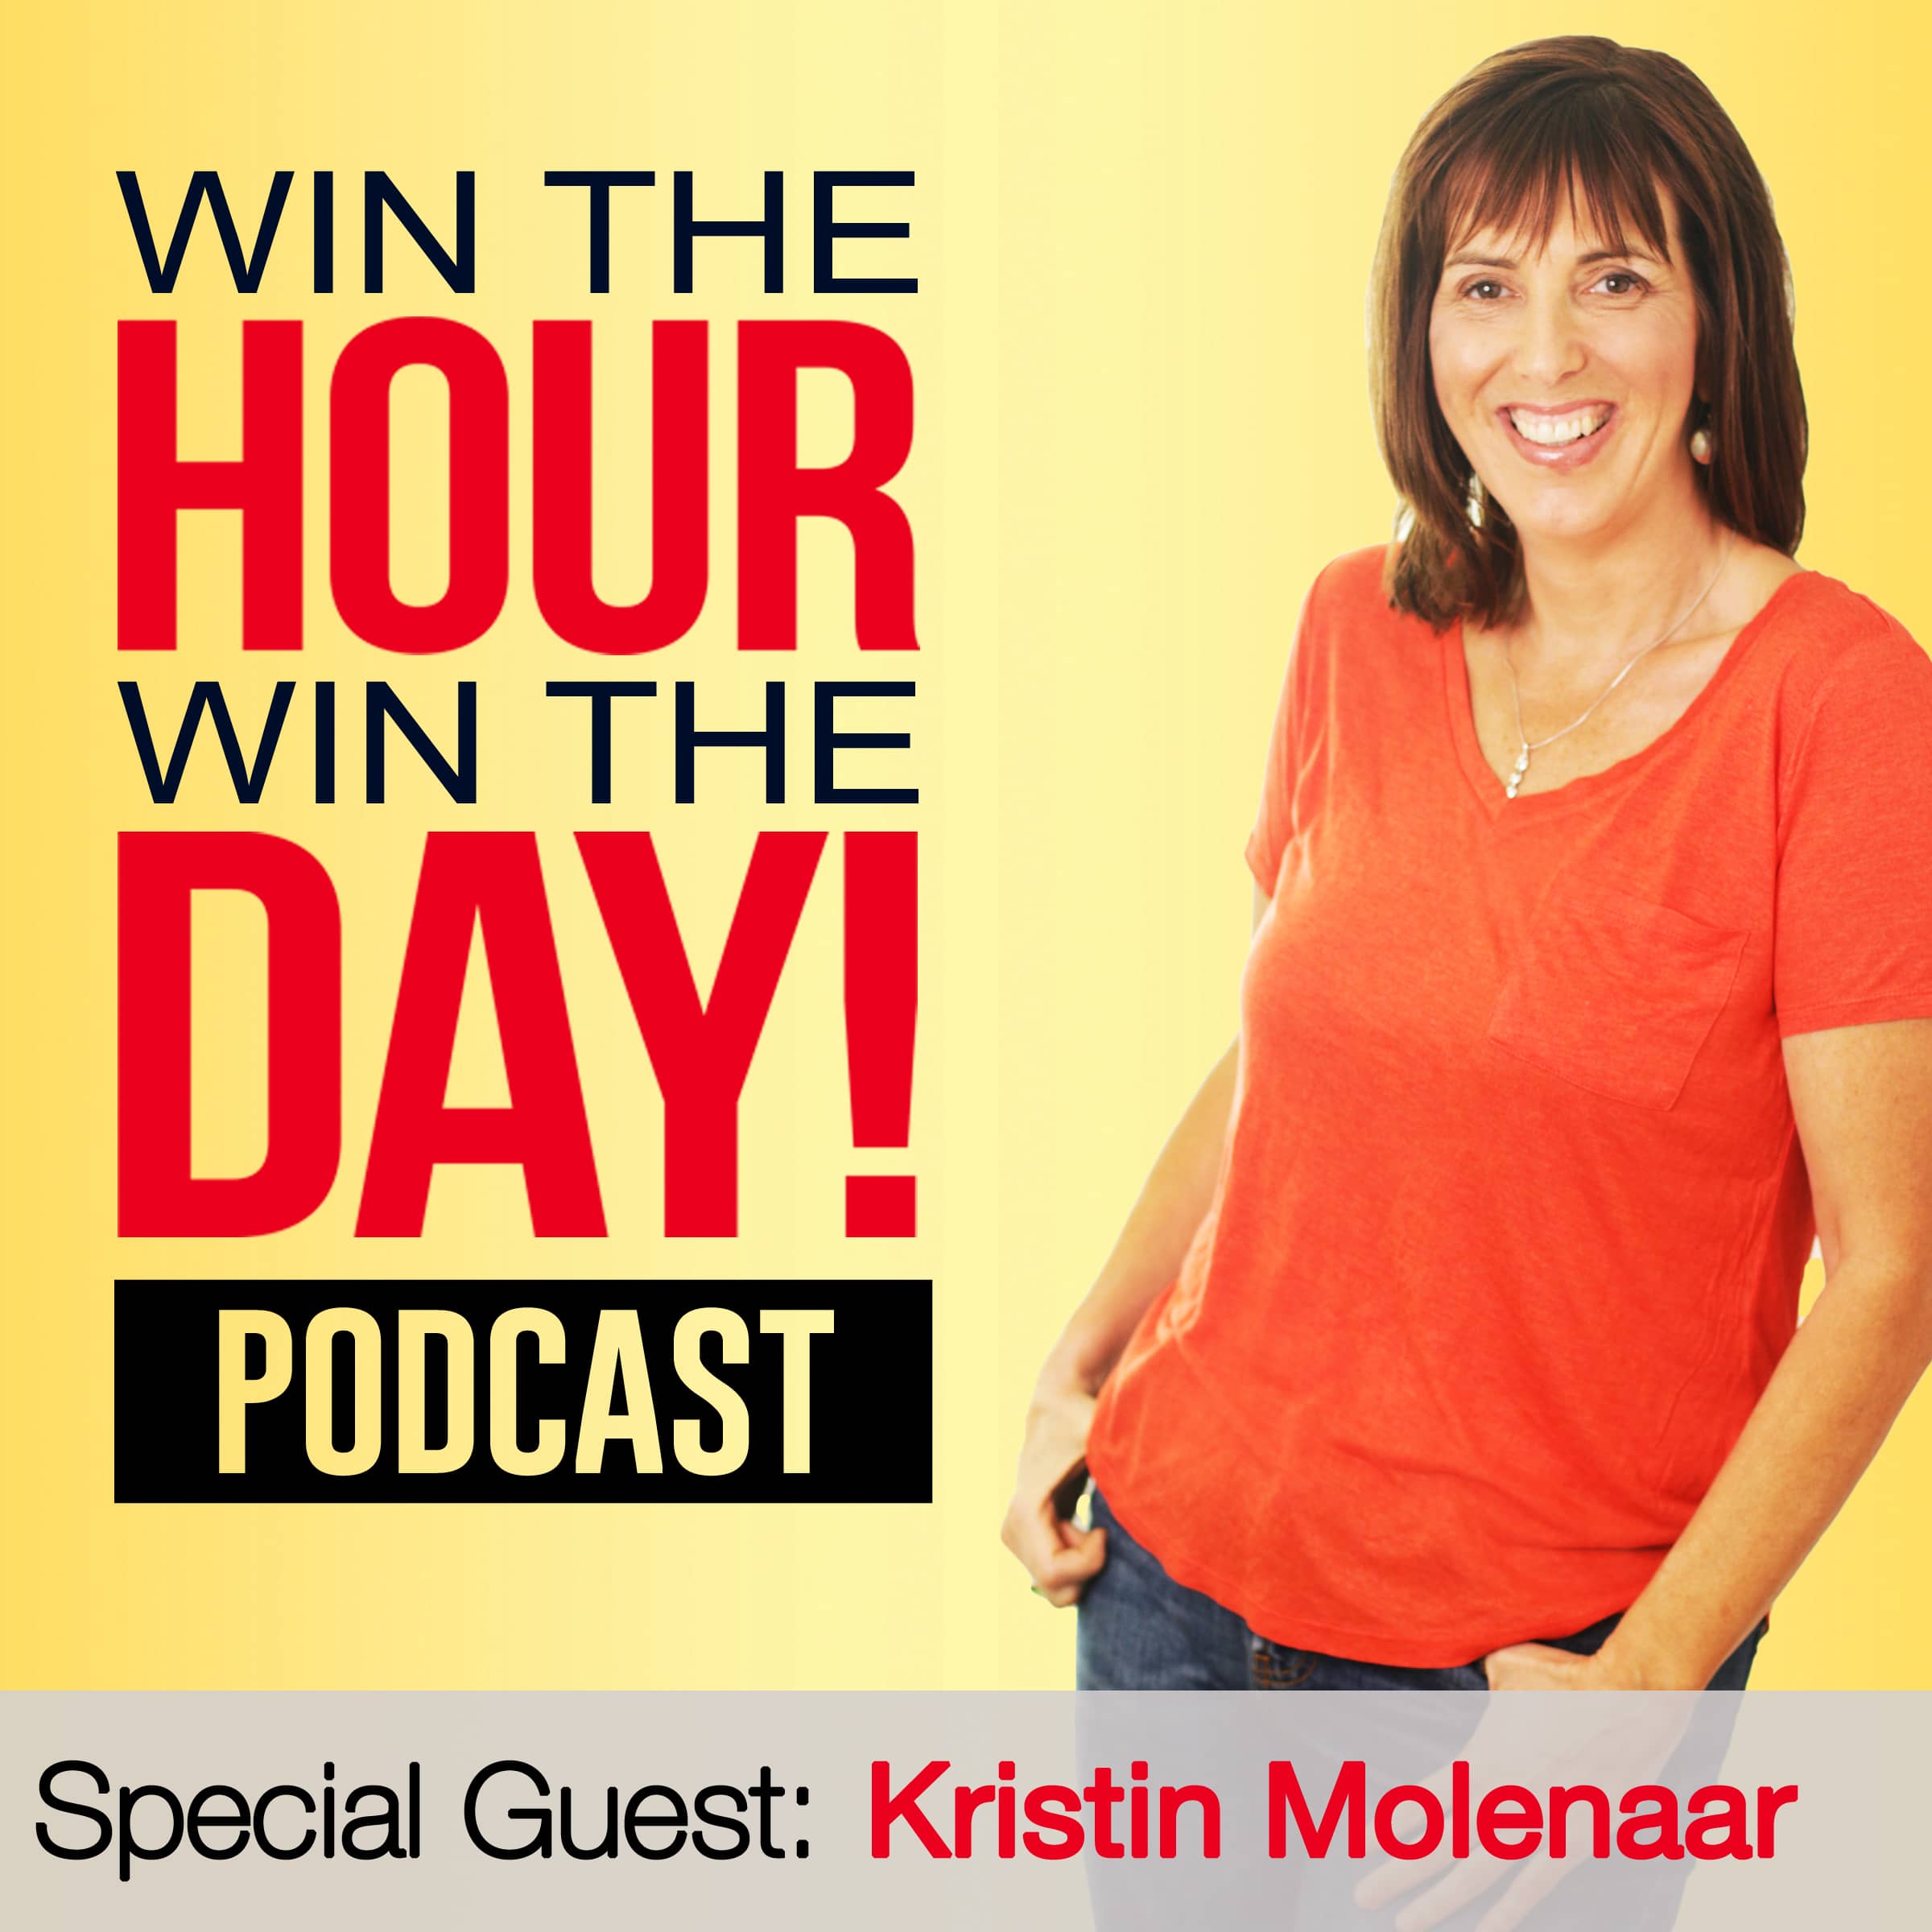 How To Build Connections That Will Build Your Business! With Kristin Molenaar